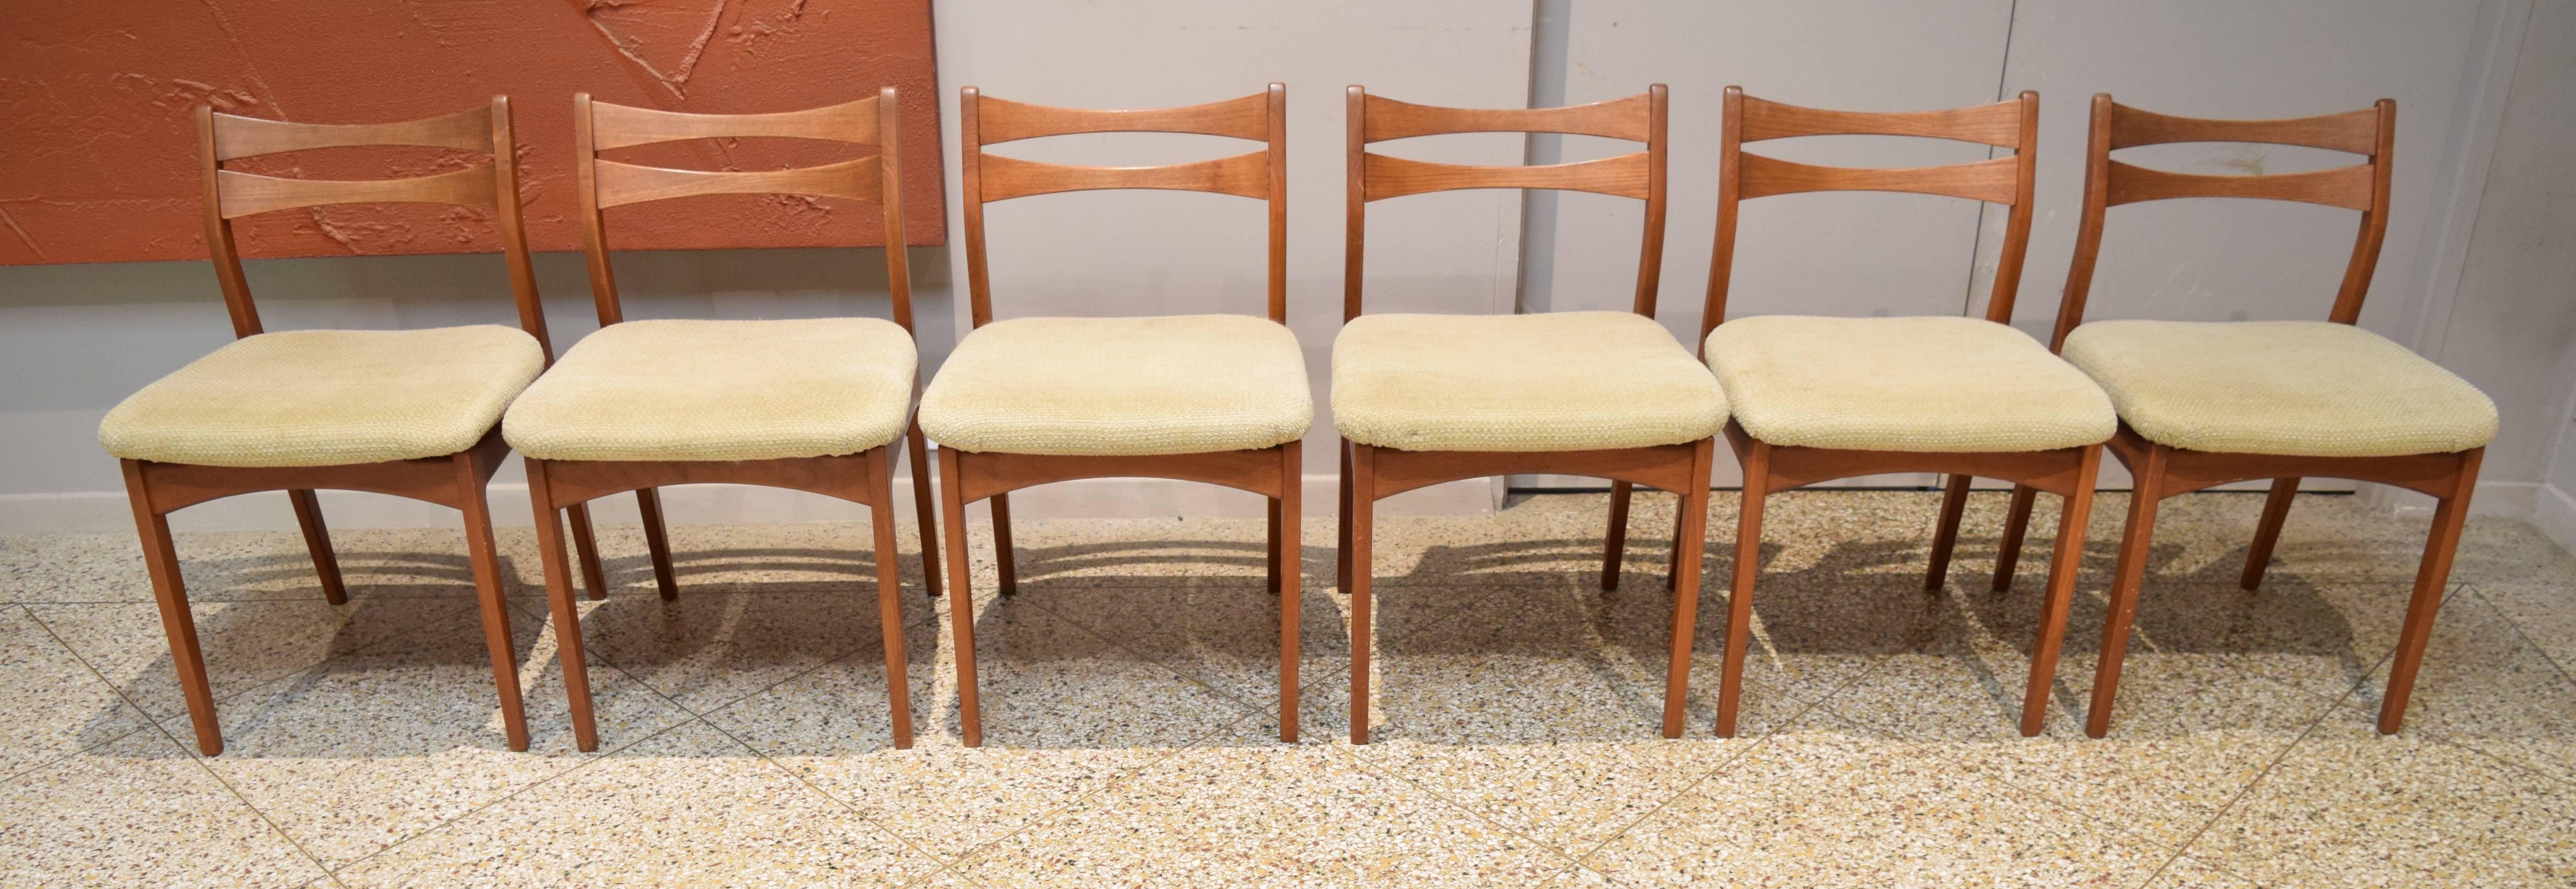 Store closing-- last day is 7/31. Offers welcome! Handsome vintage teak dining chairs by Christian Linneberg. Beautiful details including sculpted backrest and floating seat. Made in Denmark, circa 1960s.